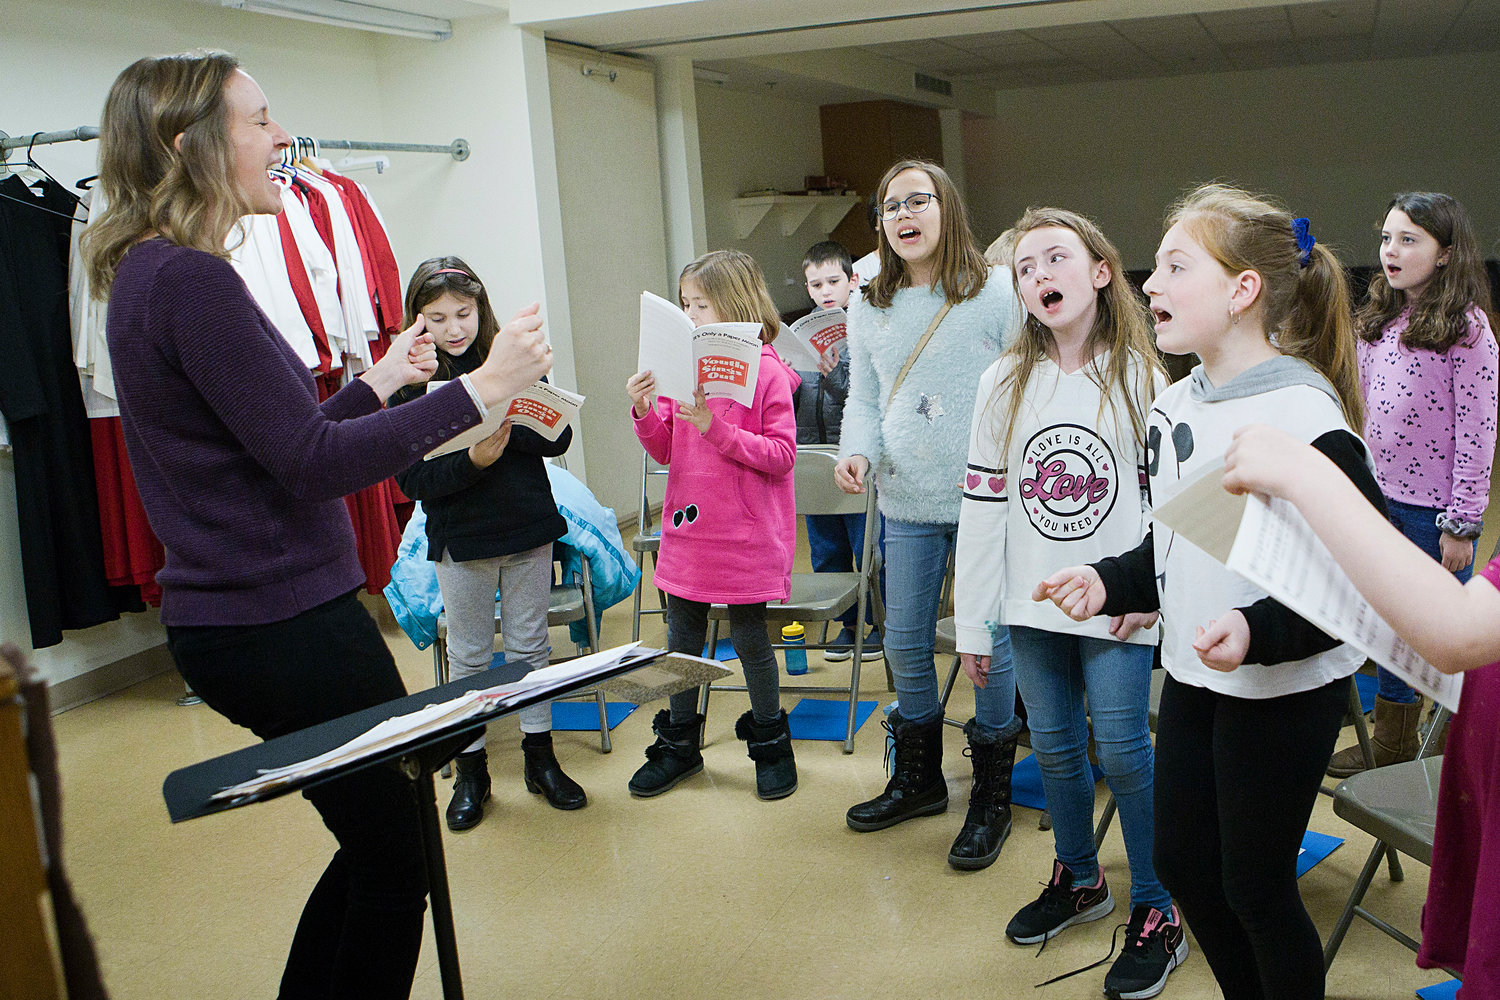 Elizabeth Woodhouse
Newport County Youth Choir director Elizabeth Woodhouse (left) belts out a tune along with choir members during a practice session held at St. Mary's Episcopal Church last week.